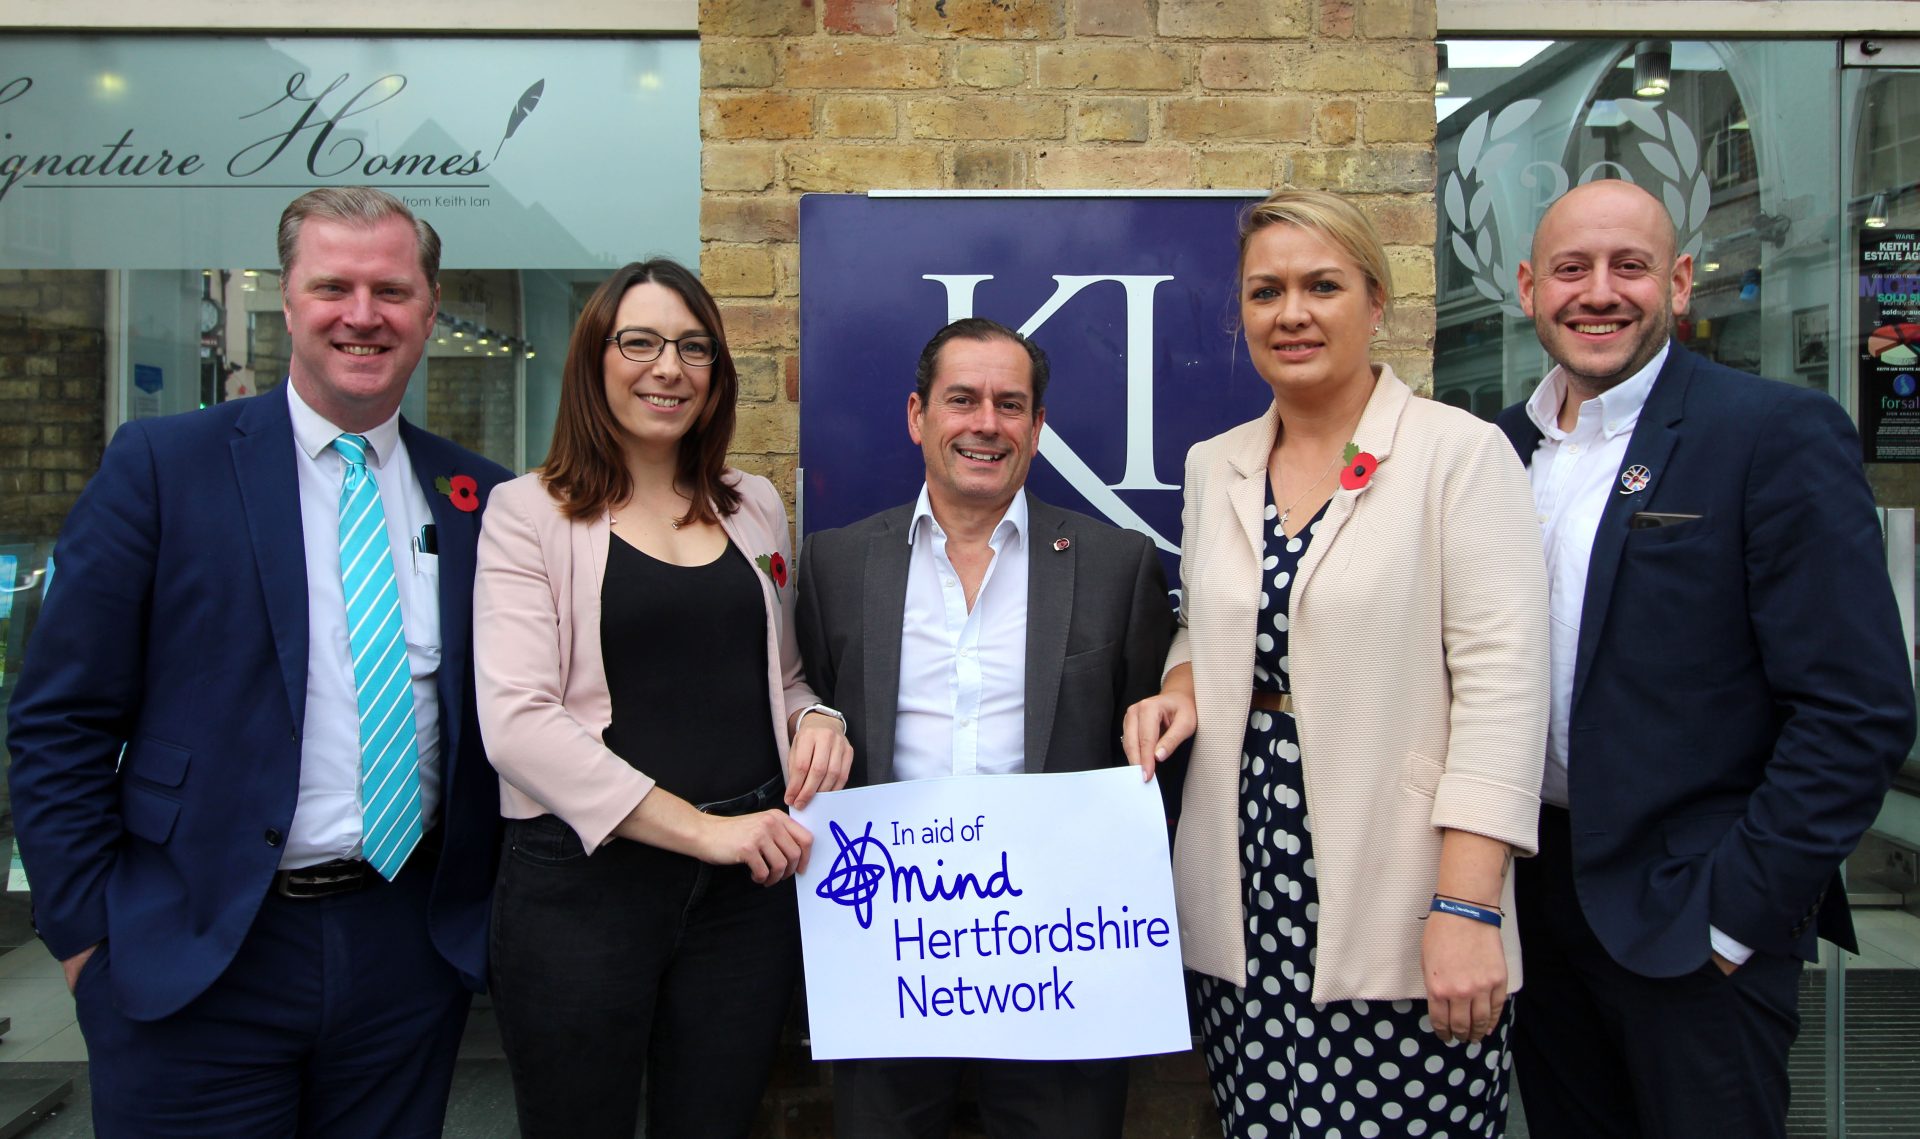 Keith Ian Estate Agents and Hertfordshire Mind Network announce fundraising partnership!